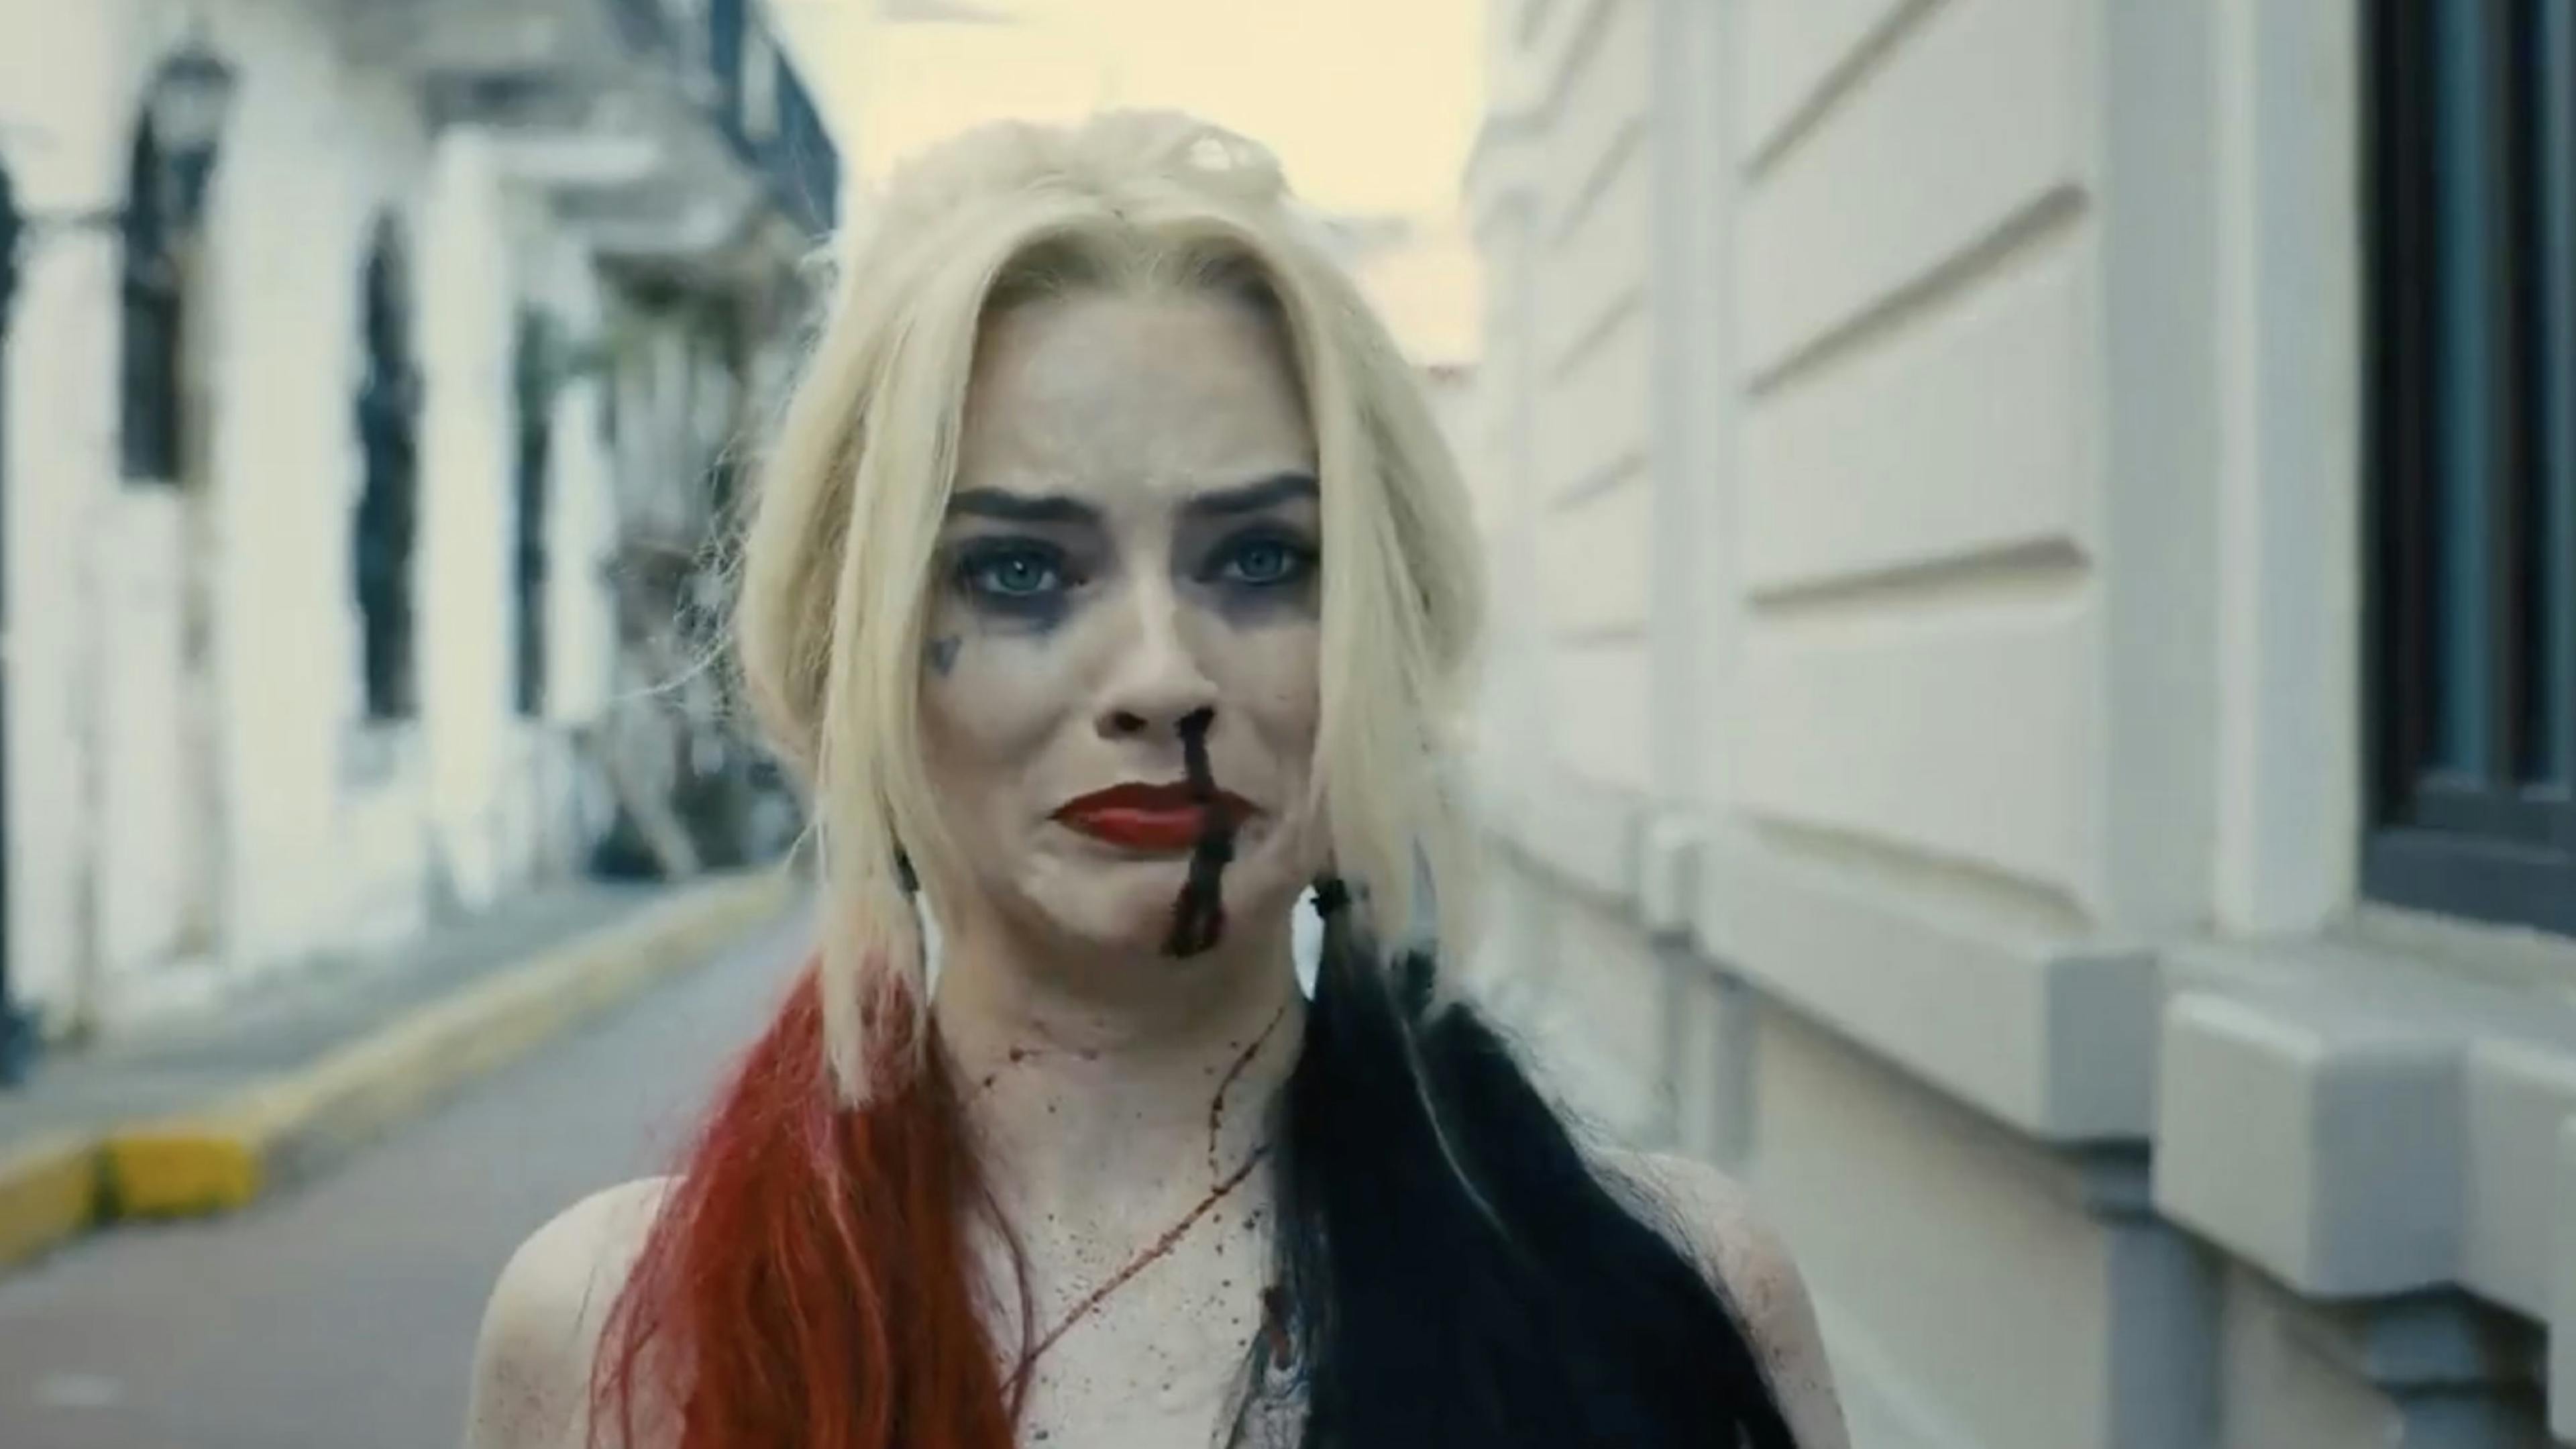 Watch the first trailer for James Gunn's The Suicide Squad